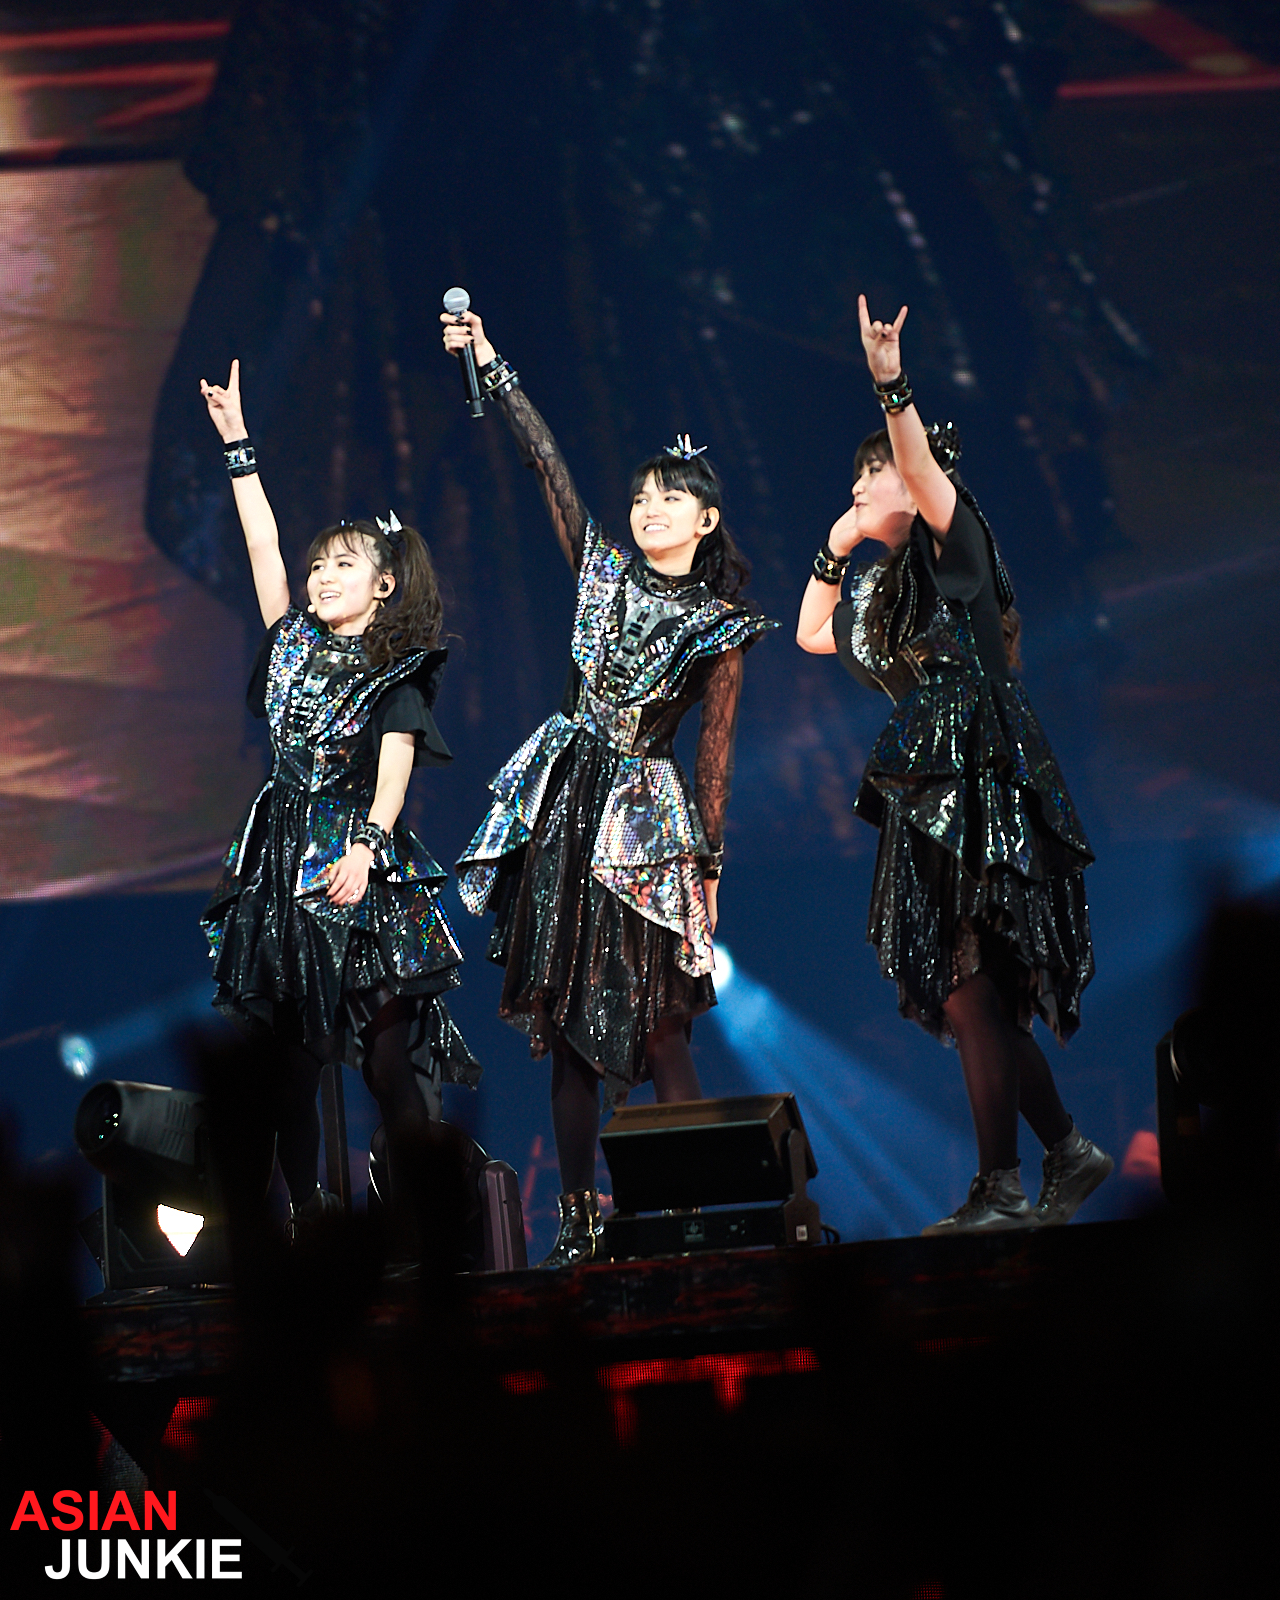 Event] BABYMETAL absolutely rock The Forum during LA tour stop 